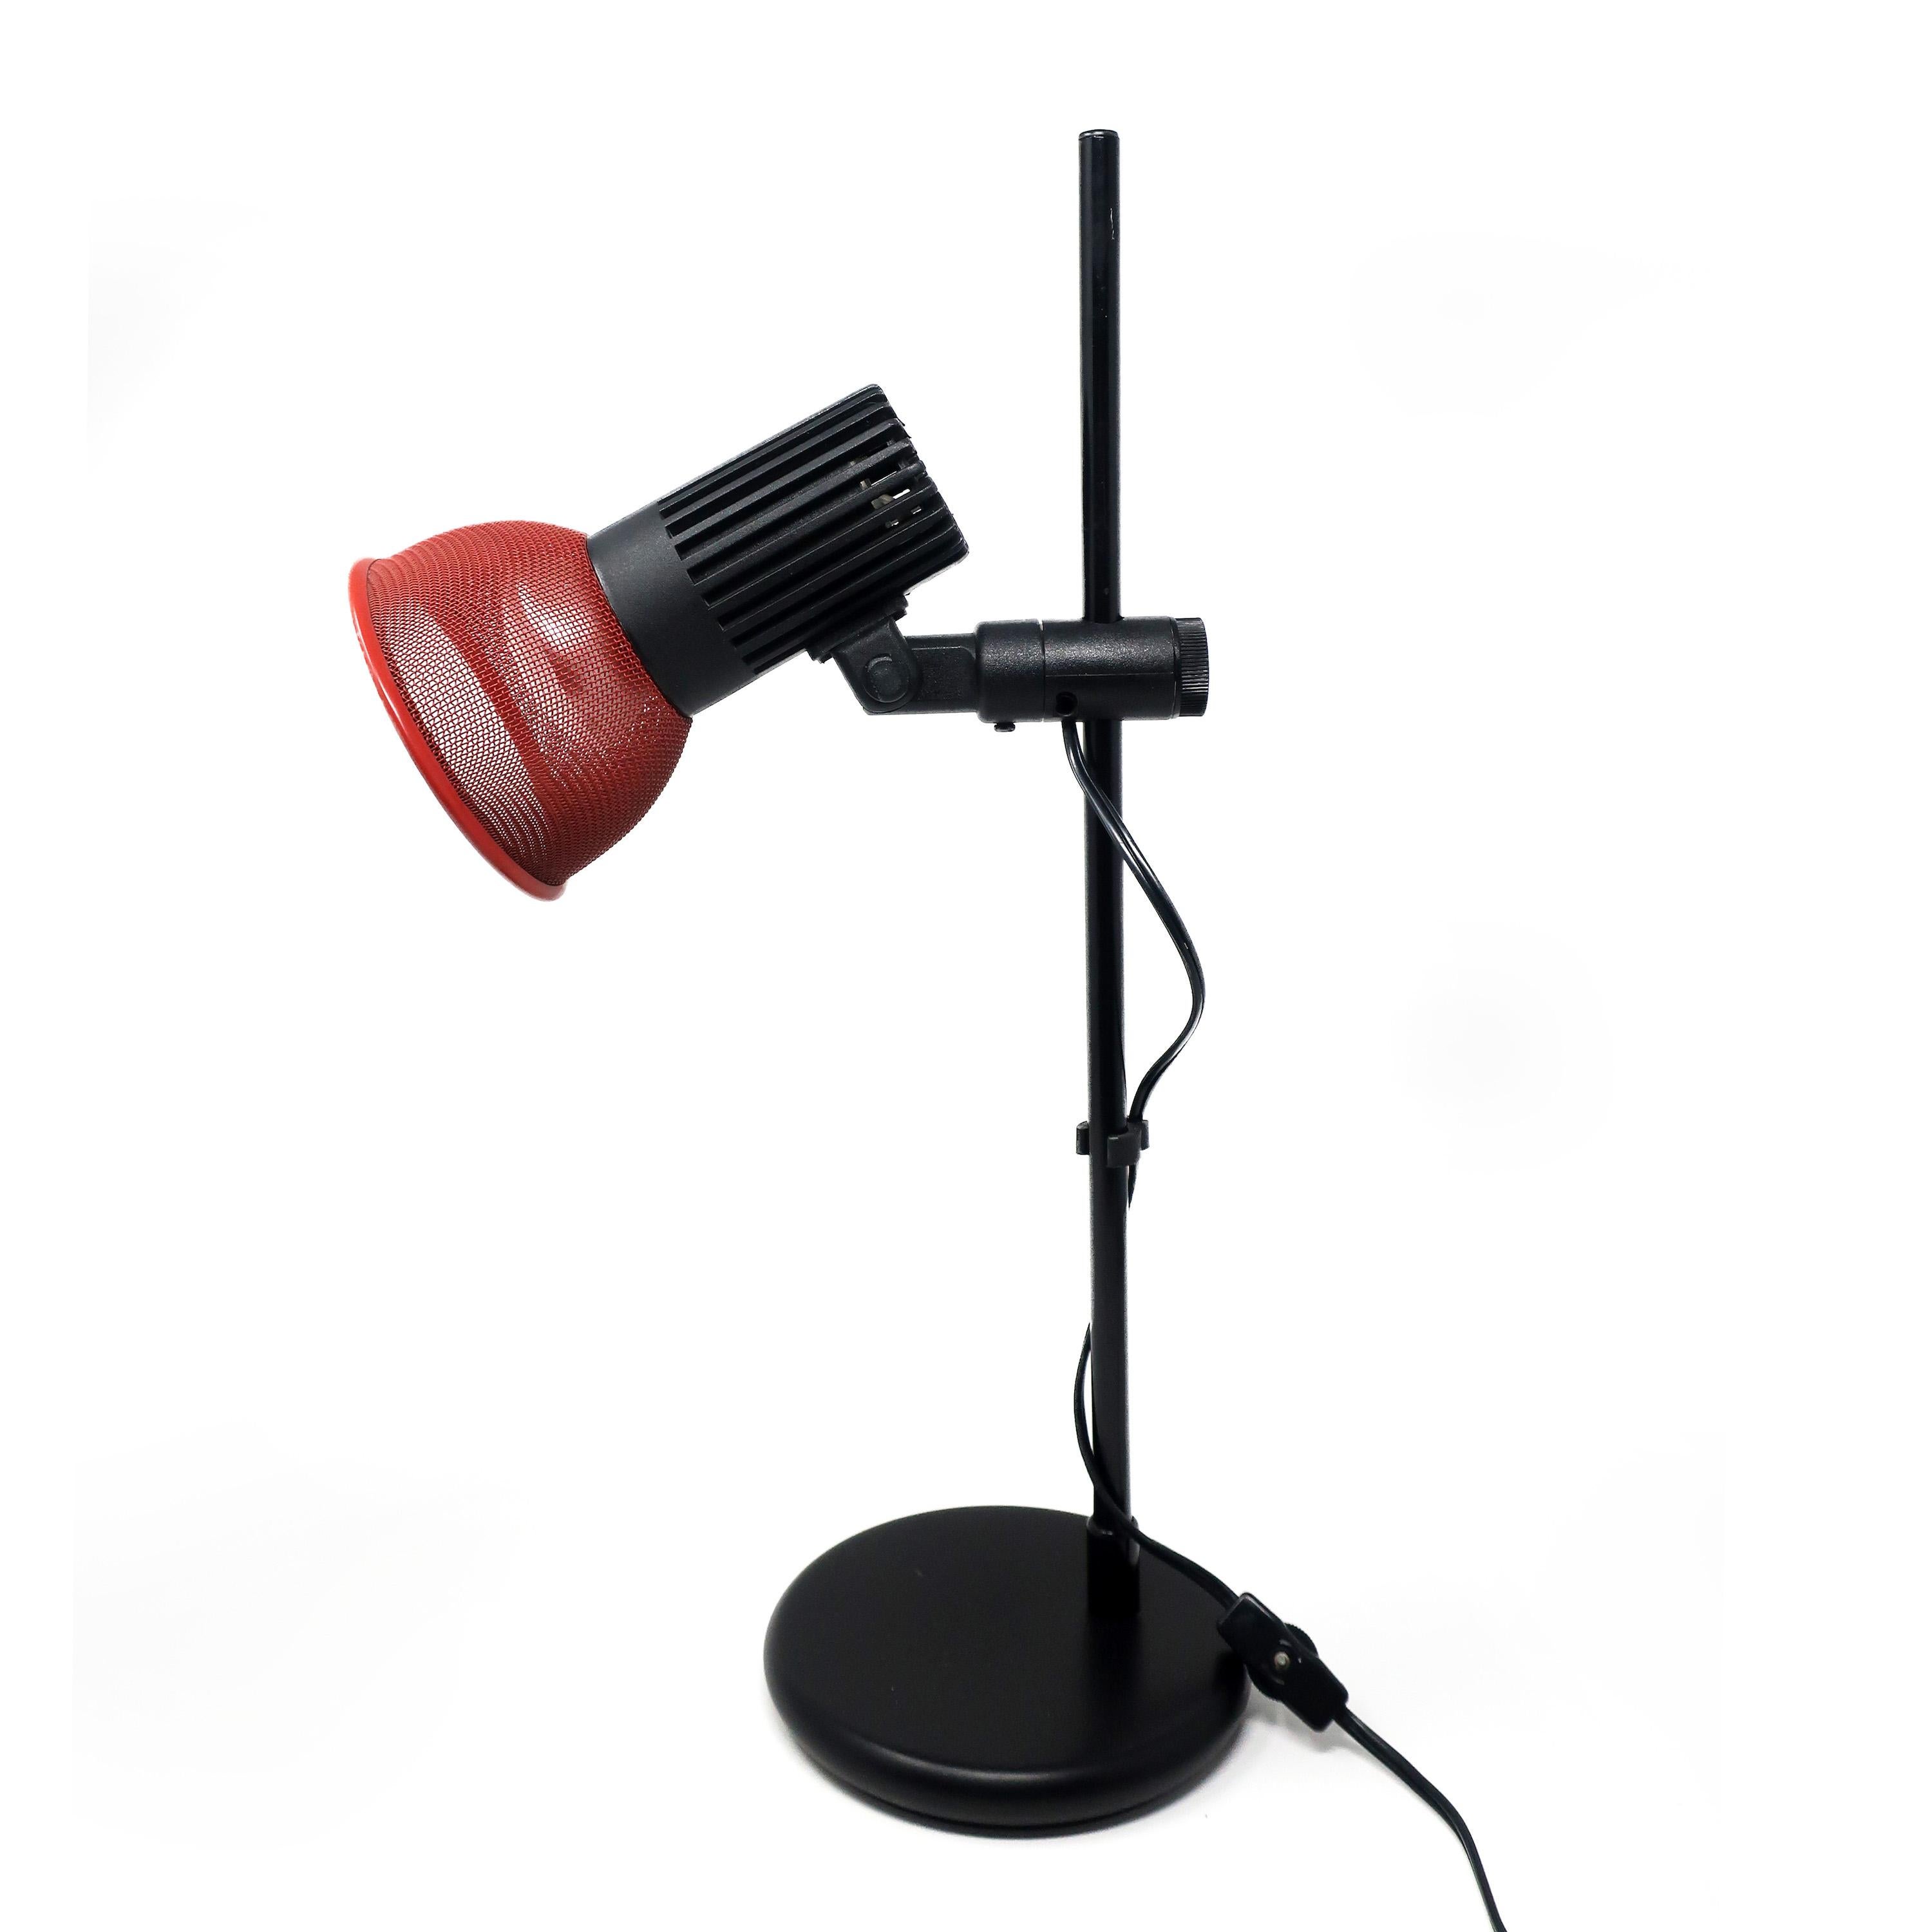 An arresting 1980s adjustable desk lamp with round enameled black base and stem, red metal shade, and power switch on the cord. Adjustable height, angle, and cord clips. 

In very good vintage condition and works perfectly.

Measures: 6” x 10” x 19”.